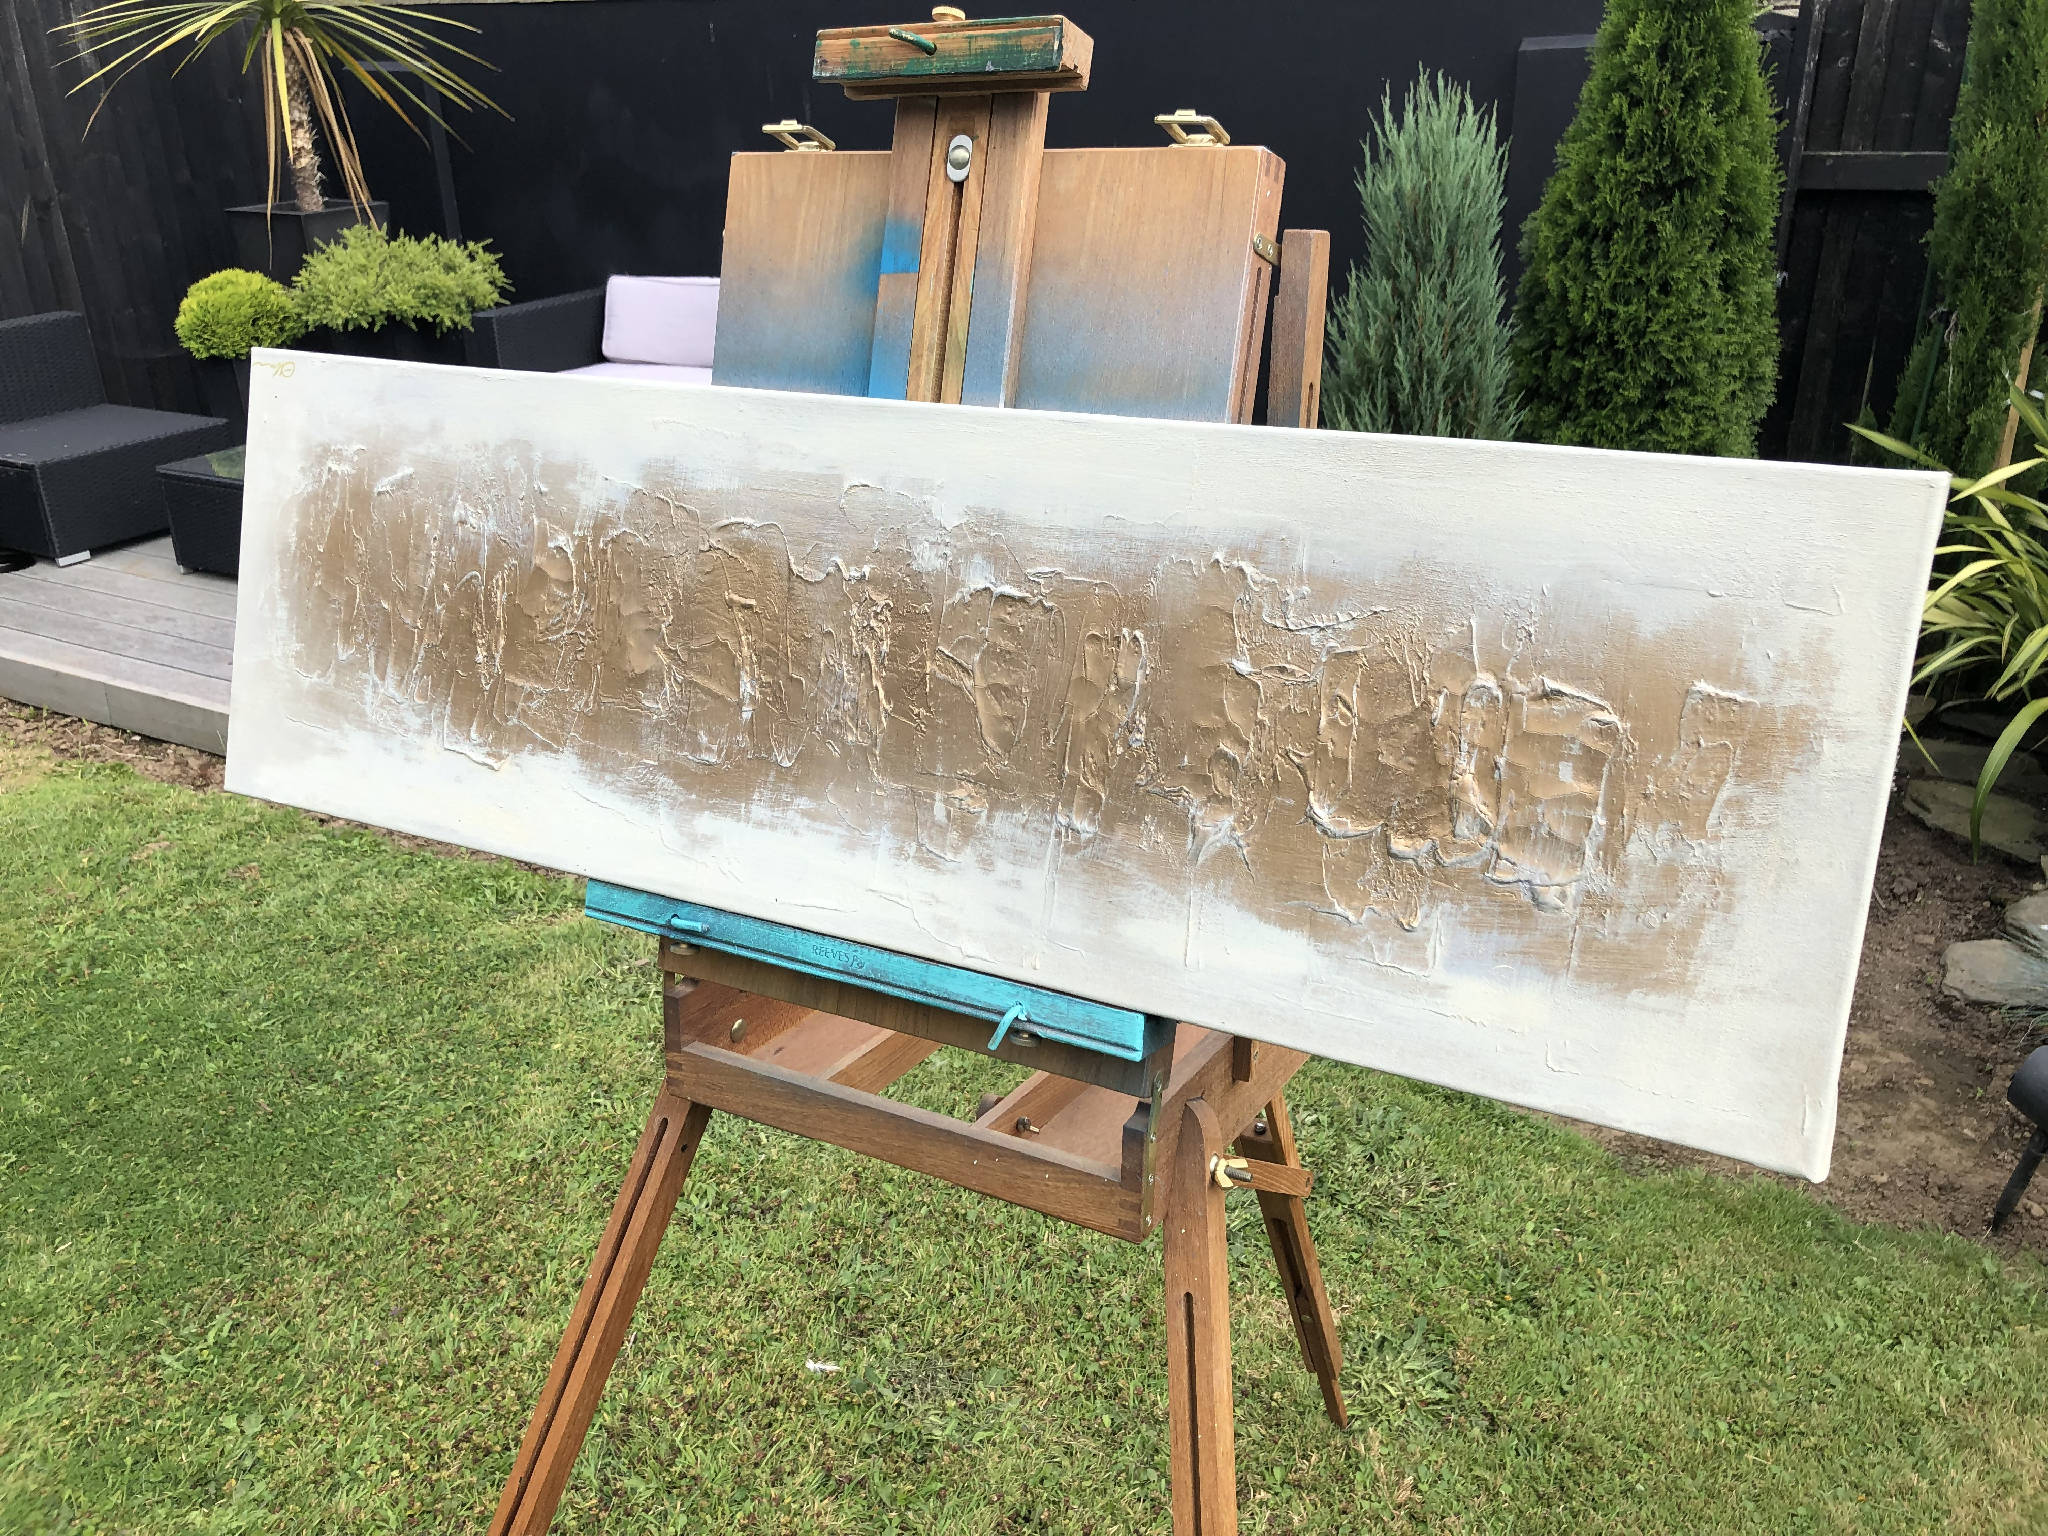 DISTRESSED GOLD - Original mixed media acrylic canvas in cream/soft grey and gold (100x30x4cm)